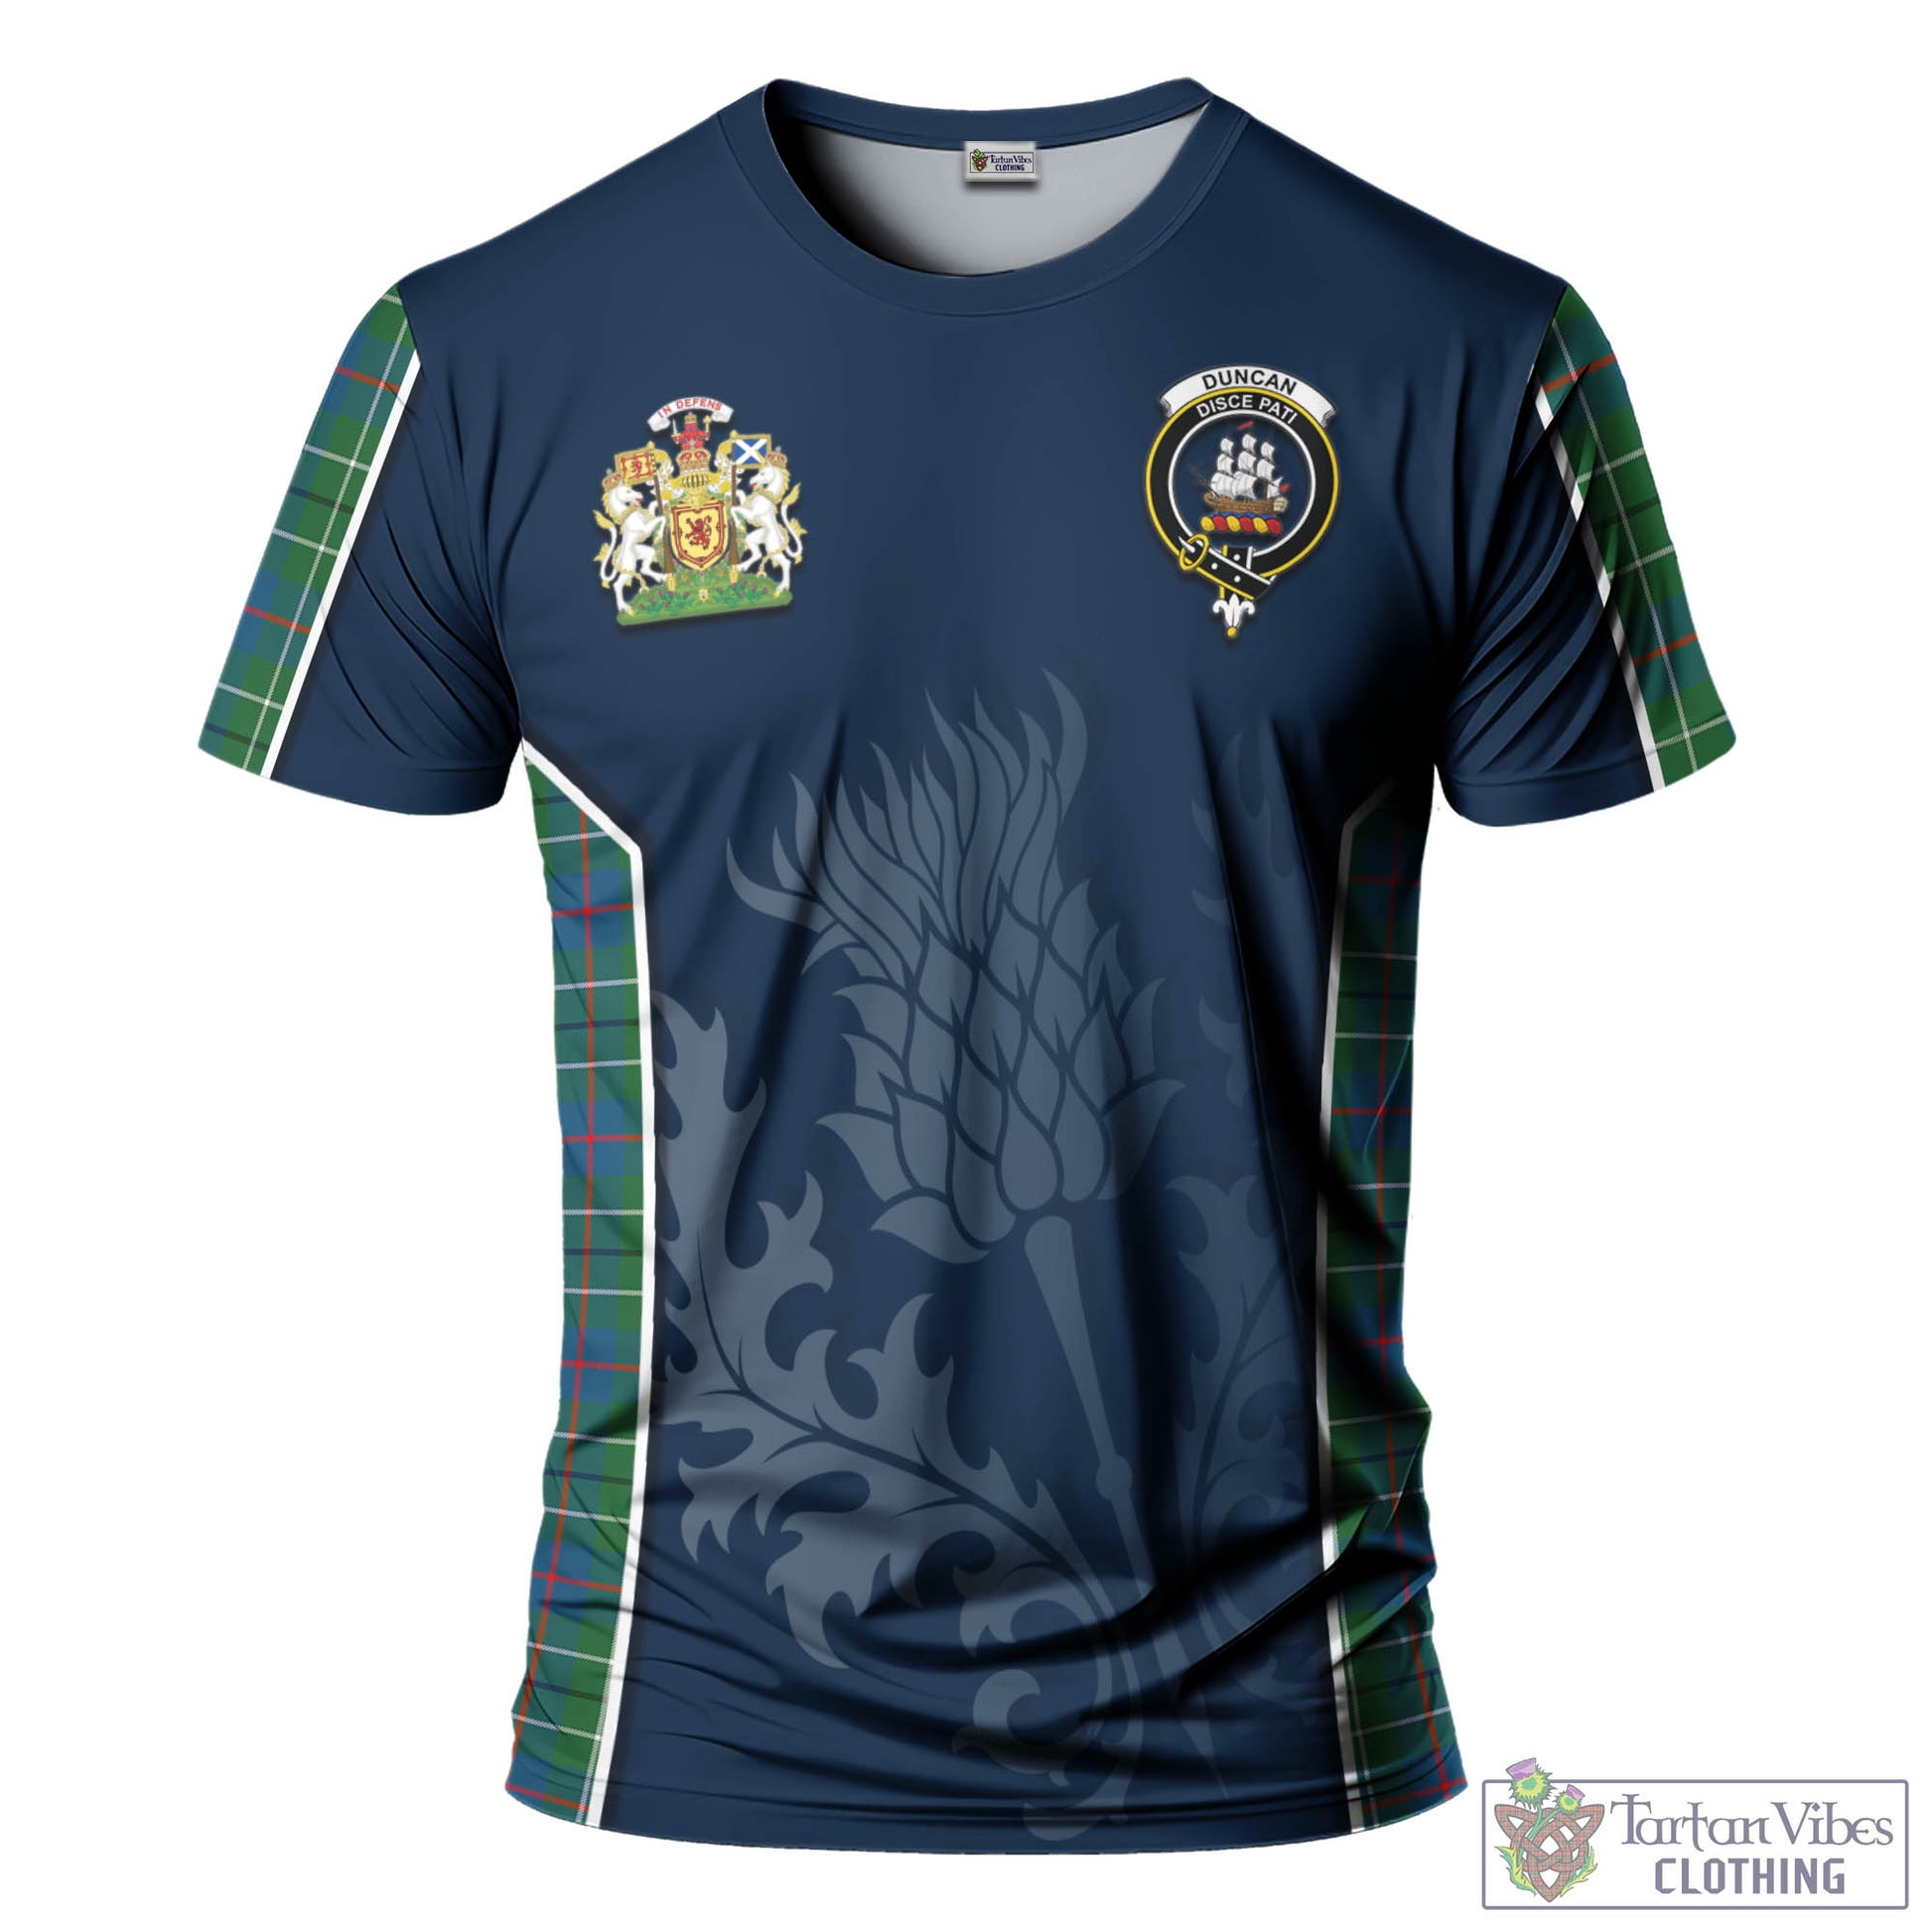 Tartan Vibes Clothing Duncan Ancient Tartan T-Shirt with Family Crest and Scottish Thistle Vibes Sport Style